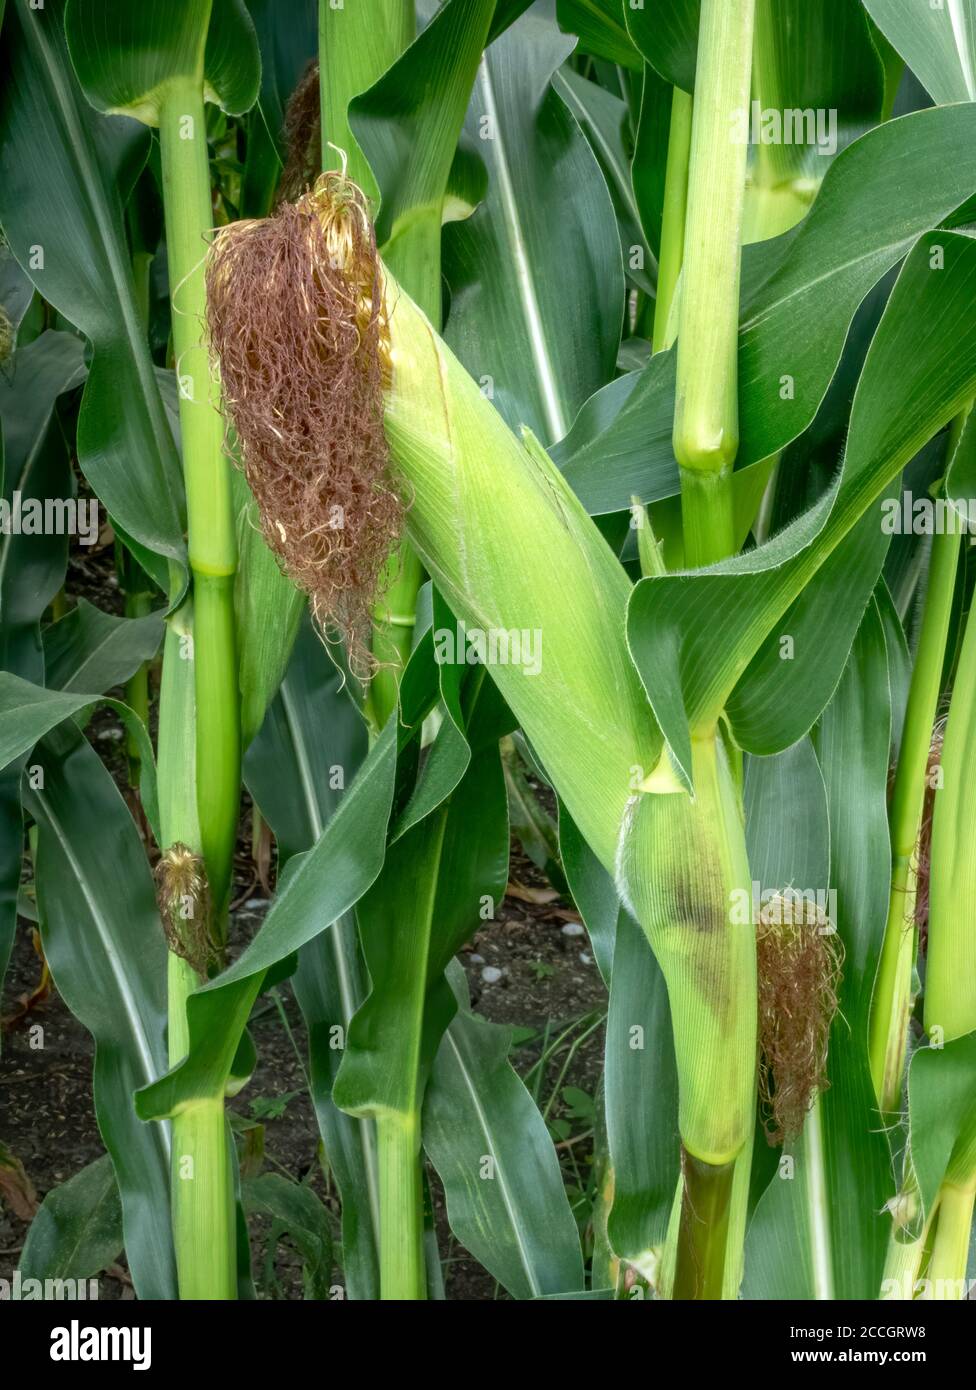 Maize or corn (Zea mays) on plant in field, Bavaria, Germany, Europe Stock Photo